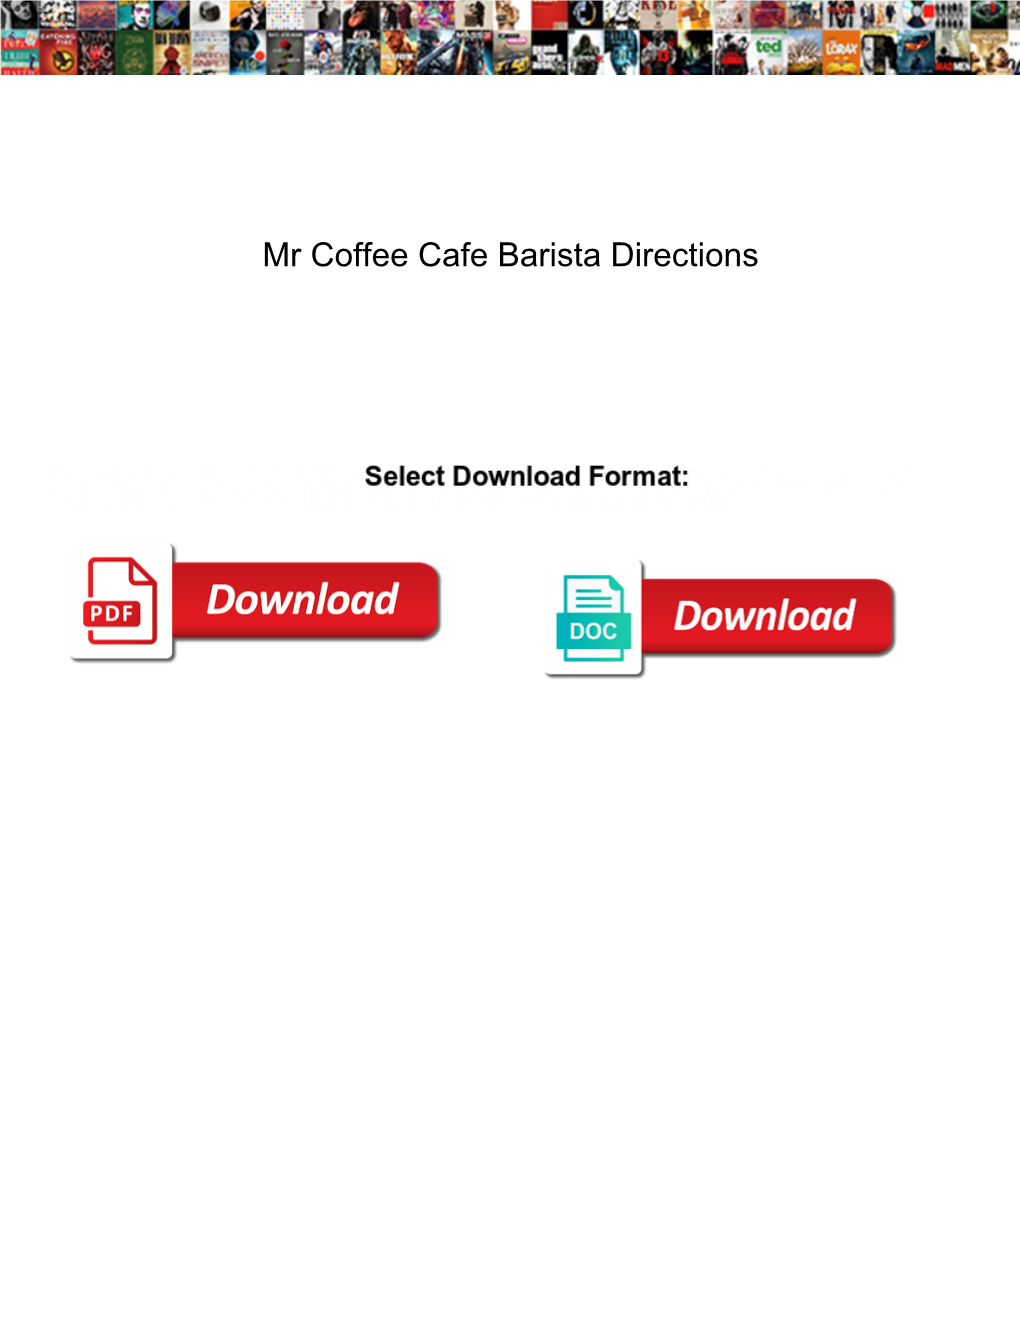 Mr Coffee Cafe Barista Directions